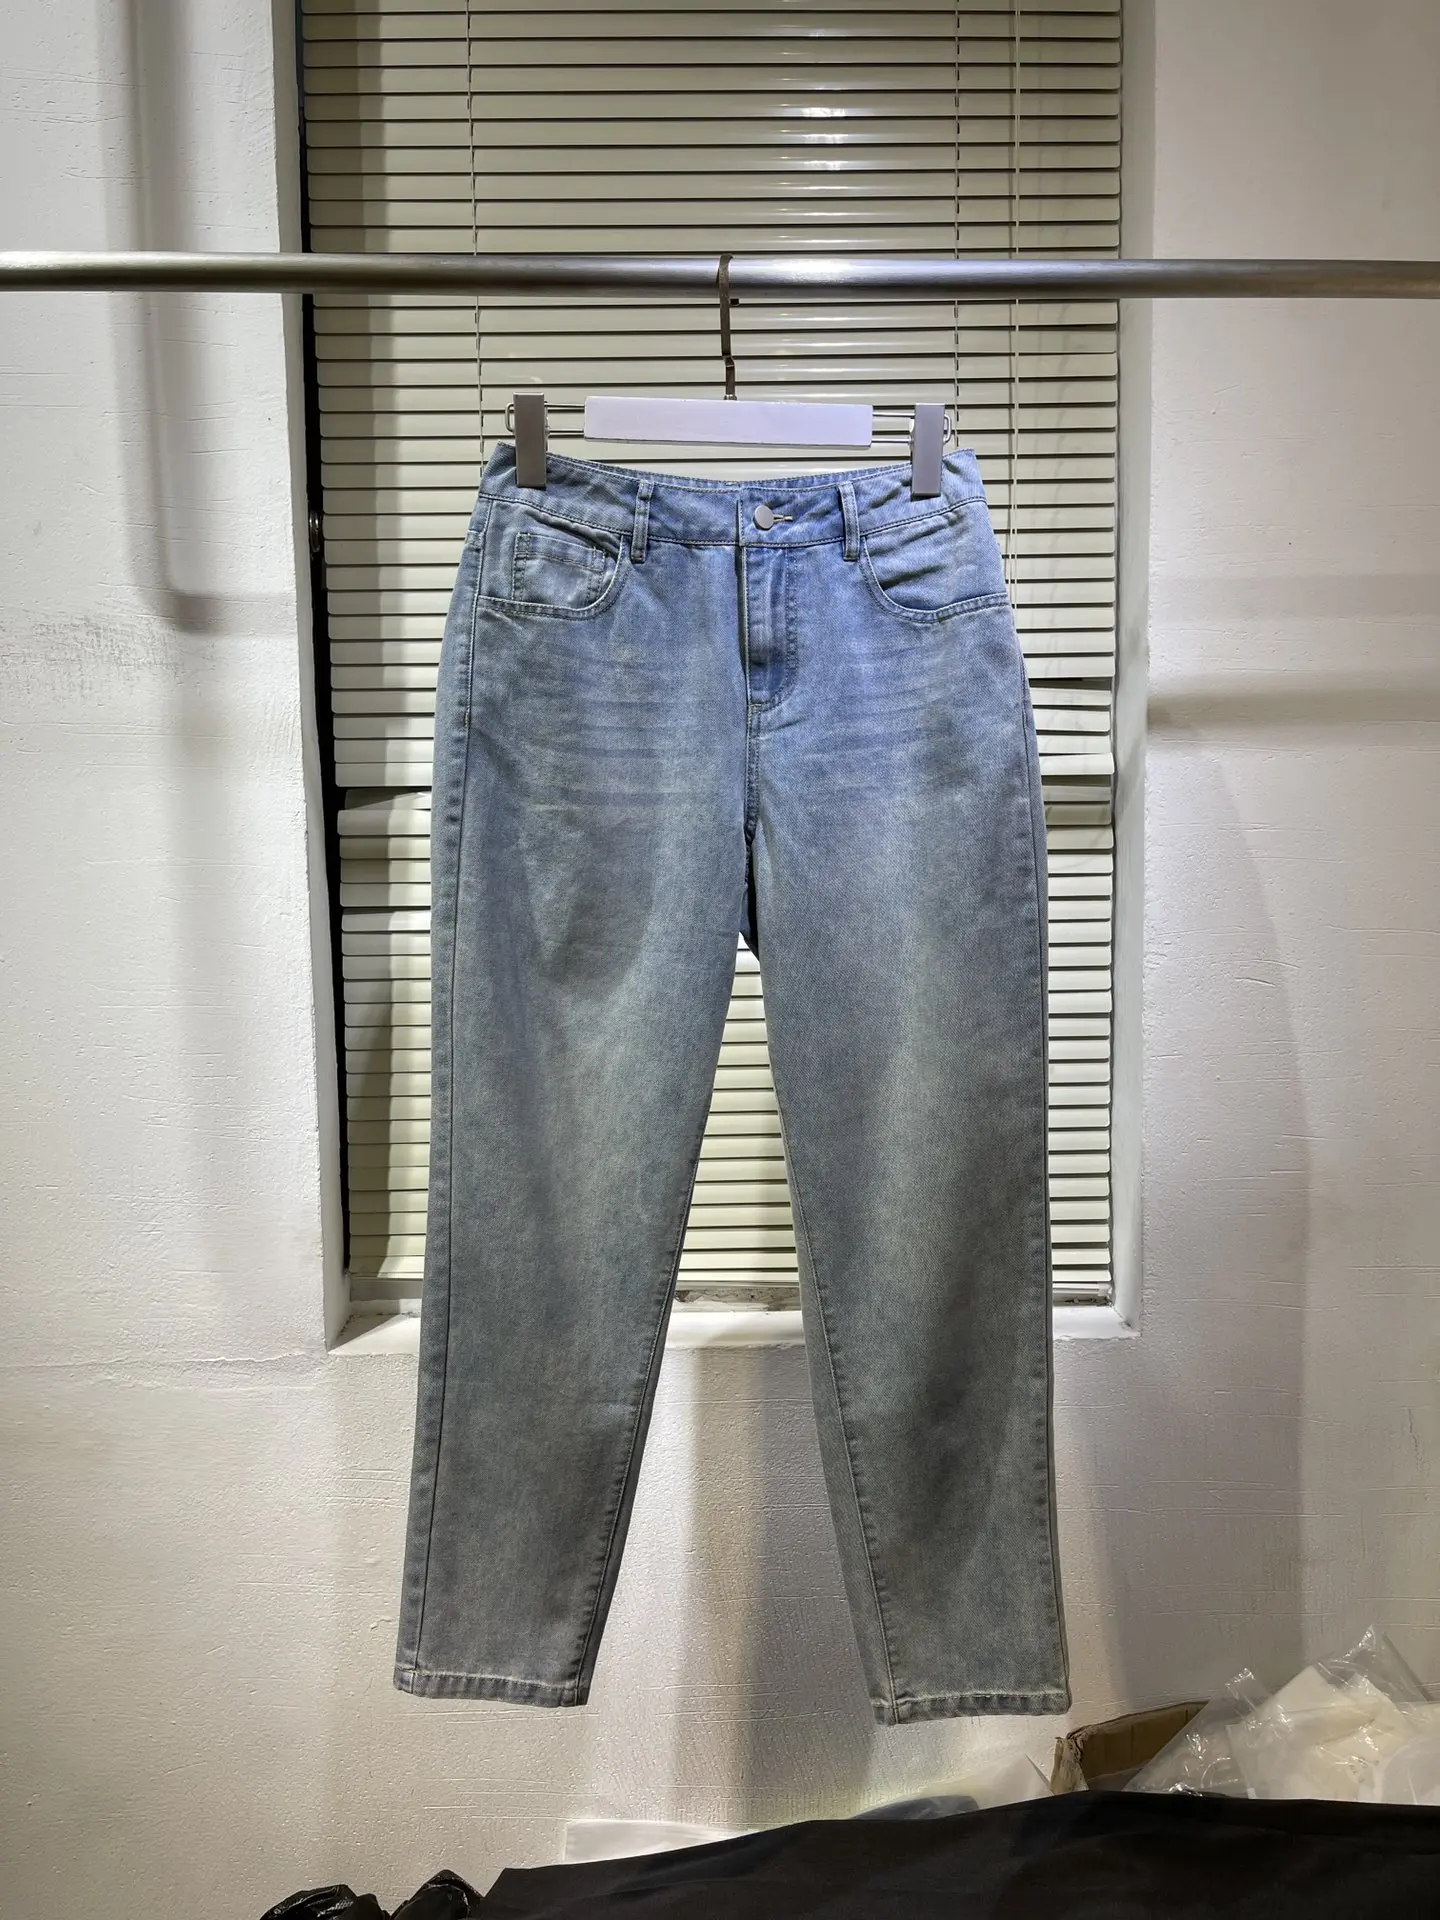 Summer new jeans wear elongated leg type straight tube micro version is very good control texture is very good